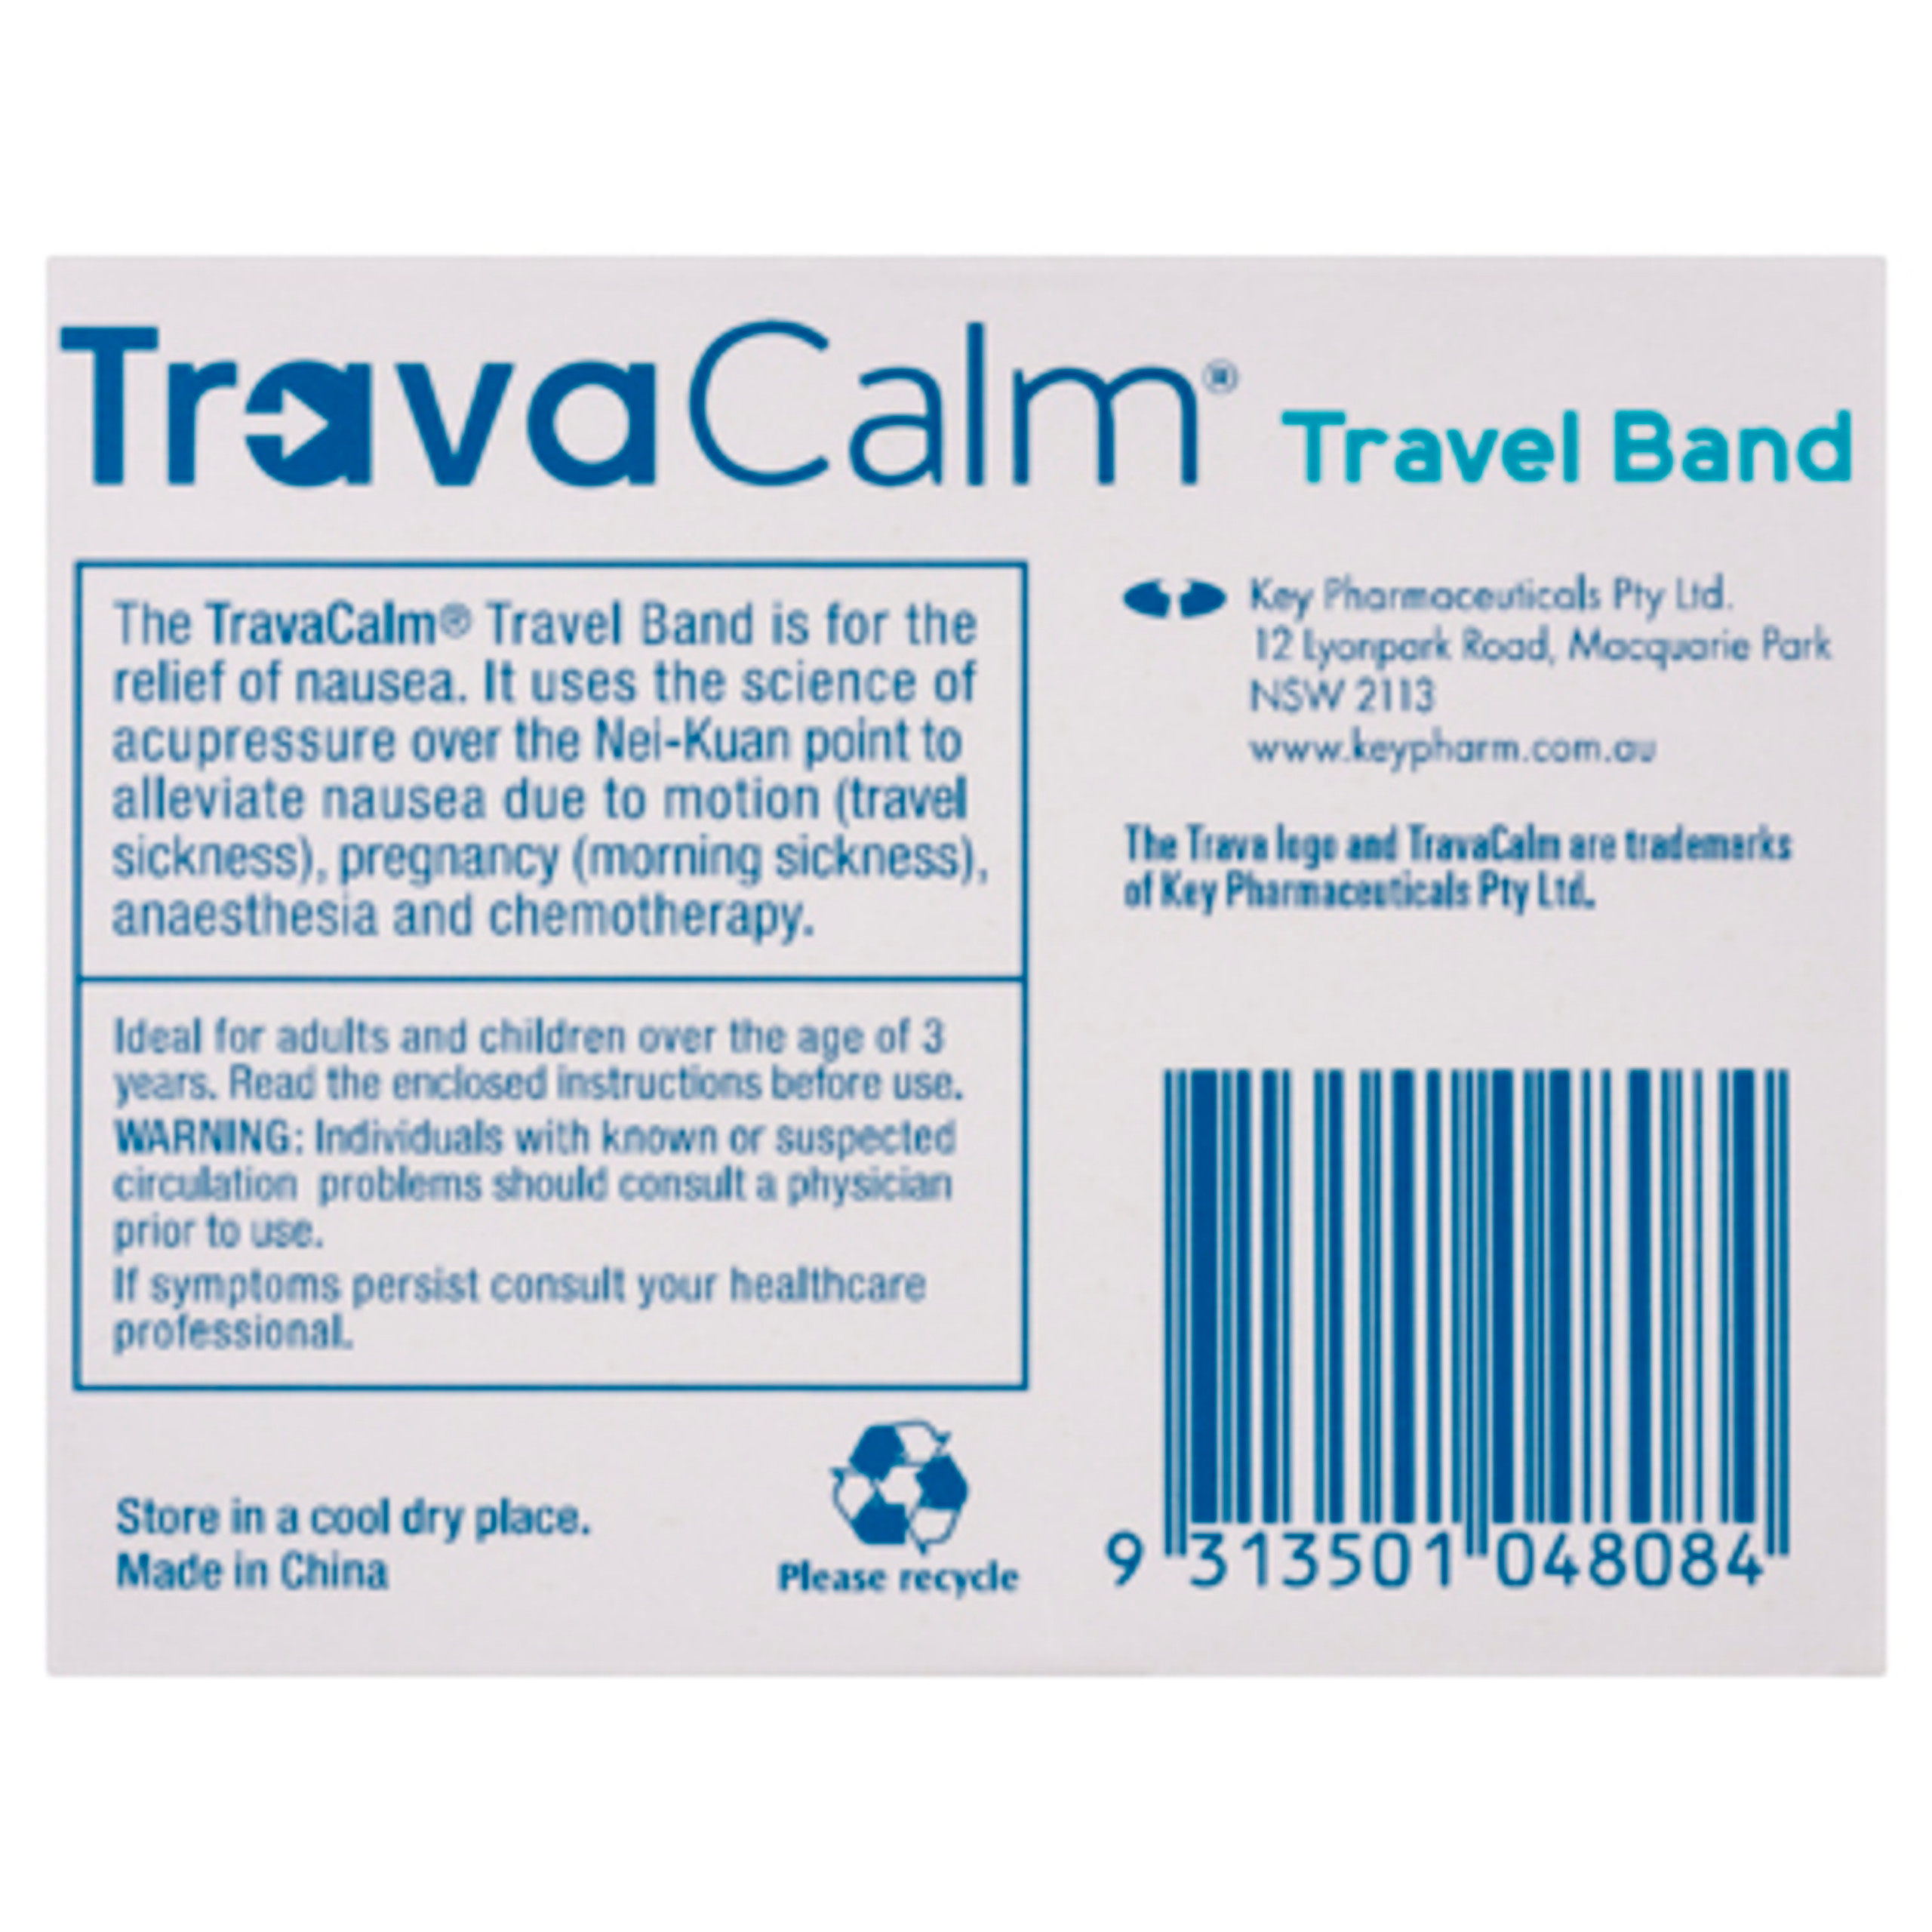 travacalm travel band review